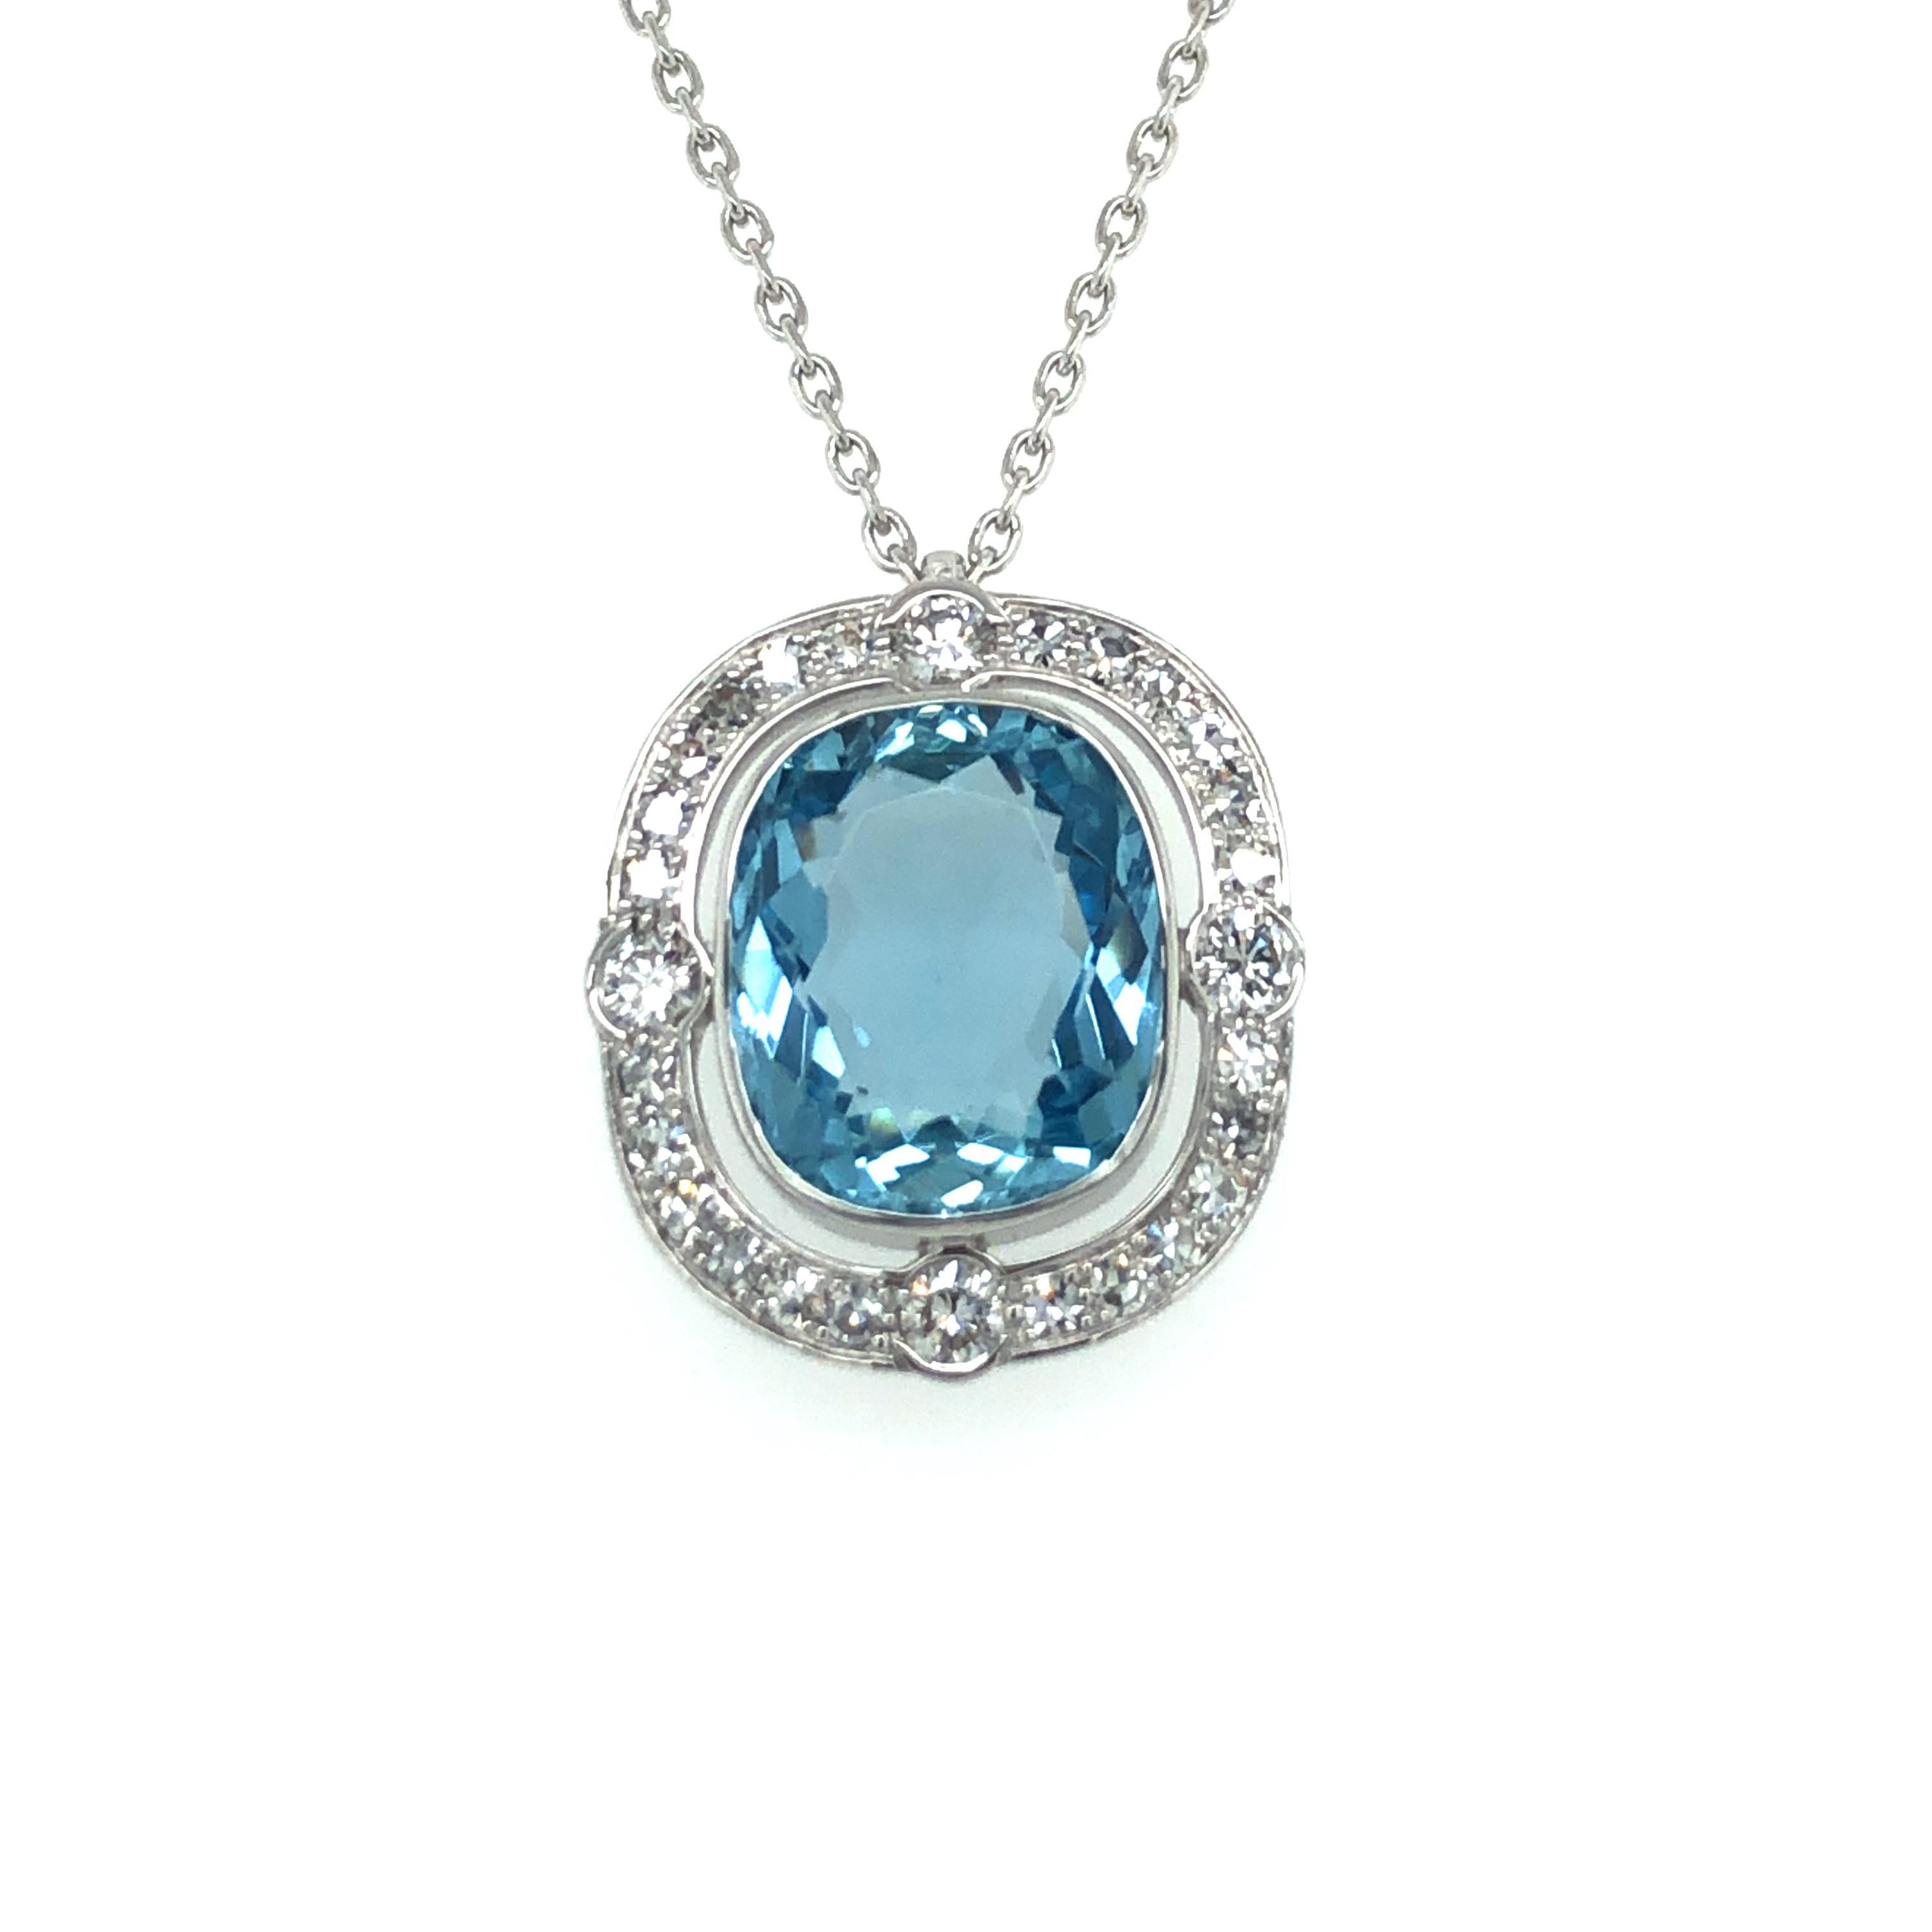 This elegant necklace features a beautiful cushion-cut aquamarine of approximately 6.00 carats. Surrounded by 4 brilliant-cut diamonds of G/H colour and vs clarity of approximately 0.30 carats total weight and 24 single-cut diamonds of G/H colour